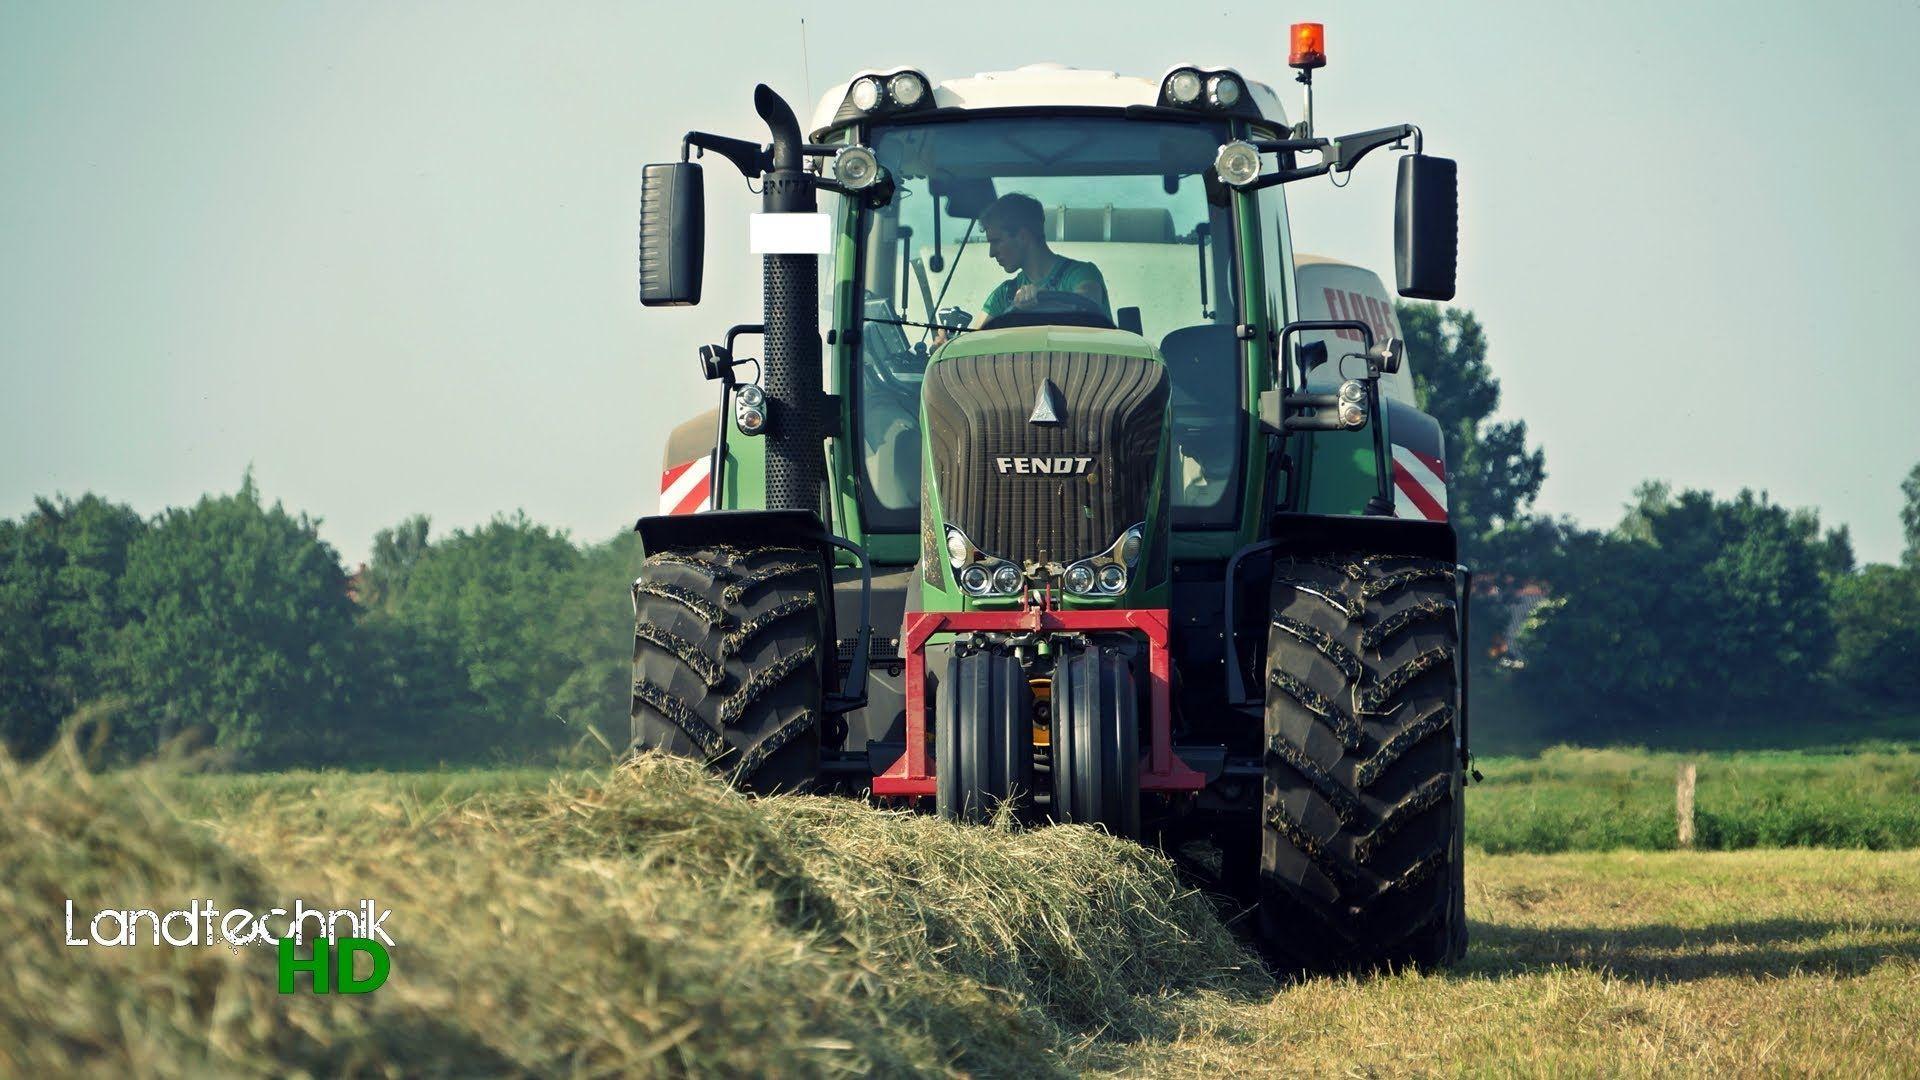 fendt wallpaper,land vehicle,tractor,vehicle,agricultural machinery,field  (#204946) - WallpaperUse